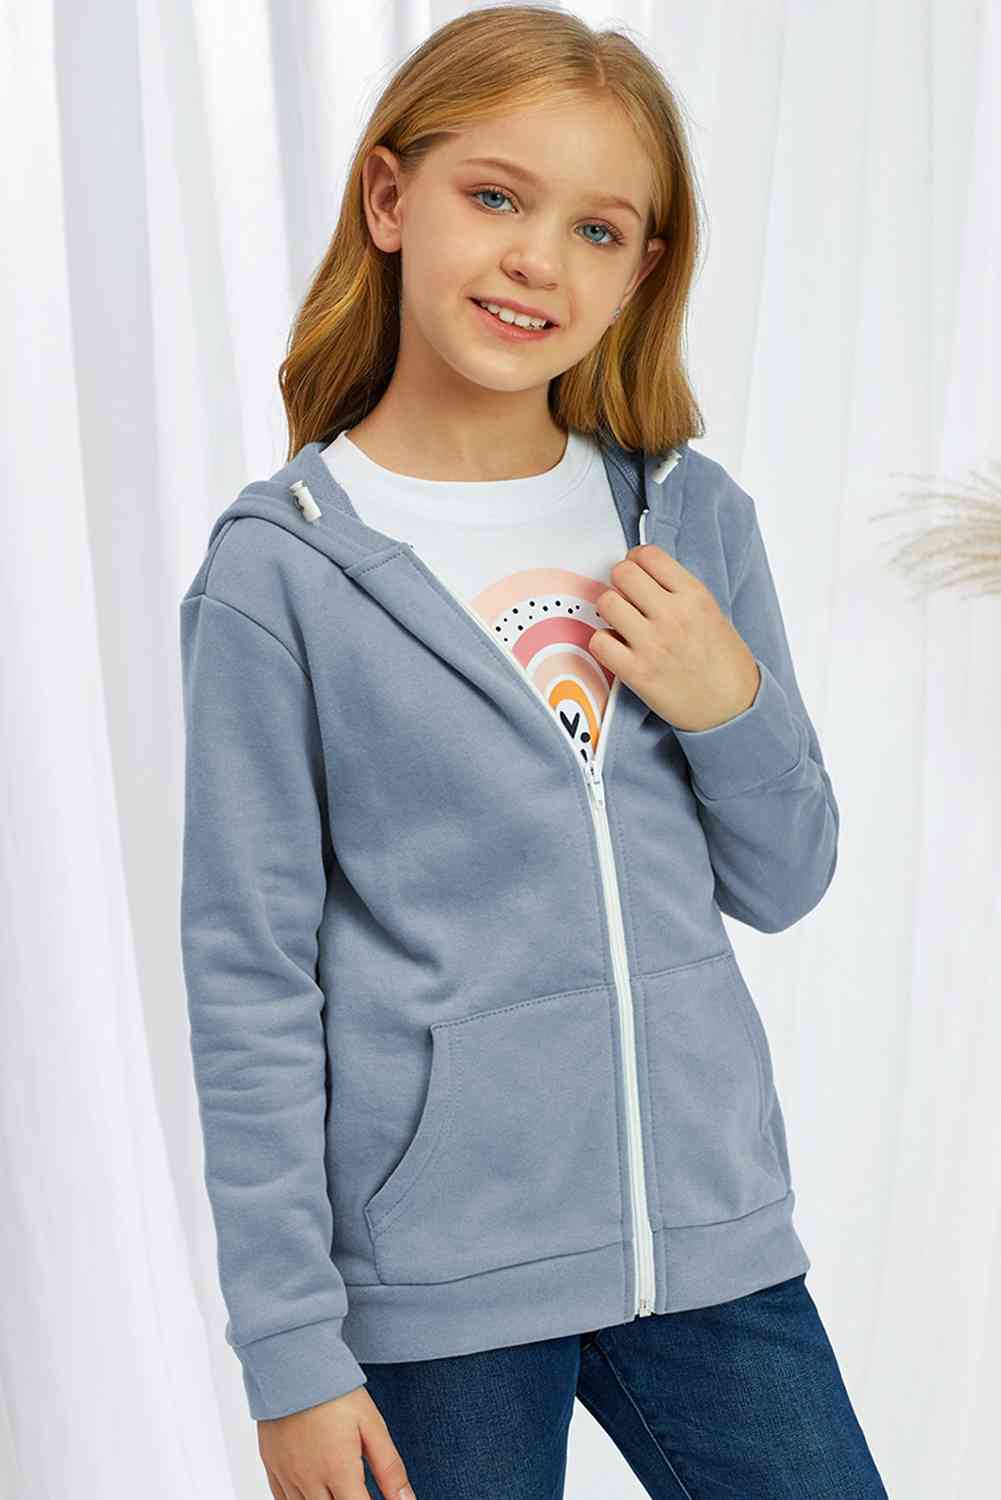 Girls Zip-Up Drawstring Hooded Jacket with Pockets BLUE ZONE PLANET